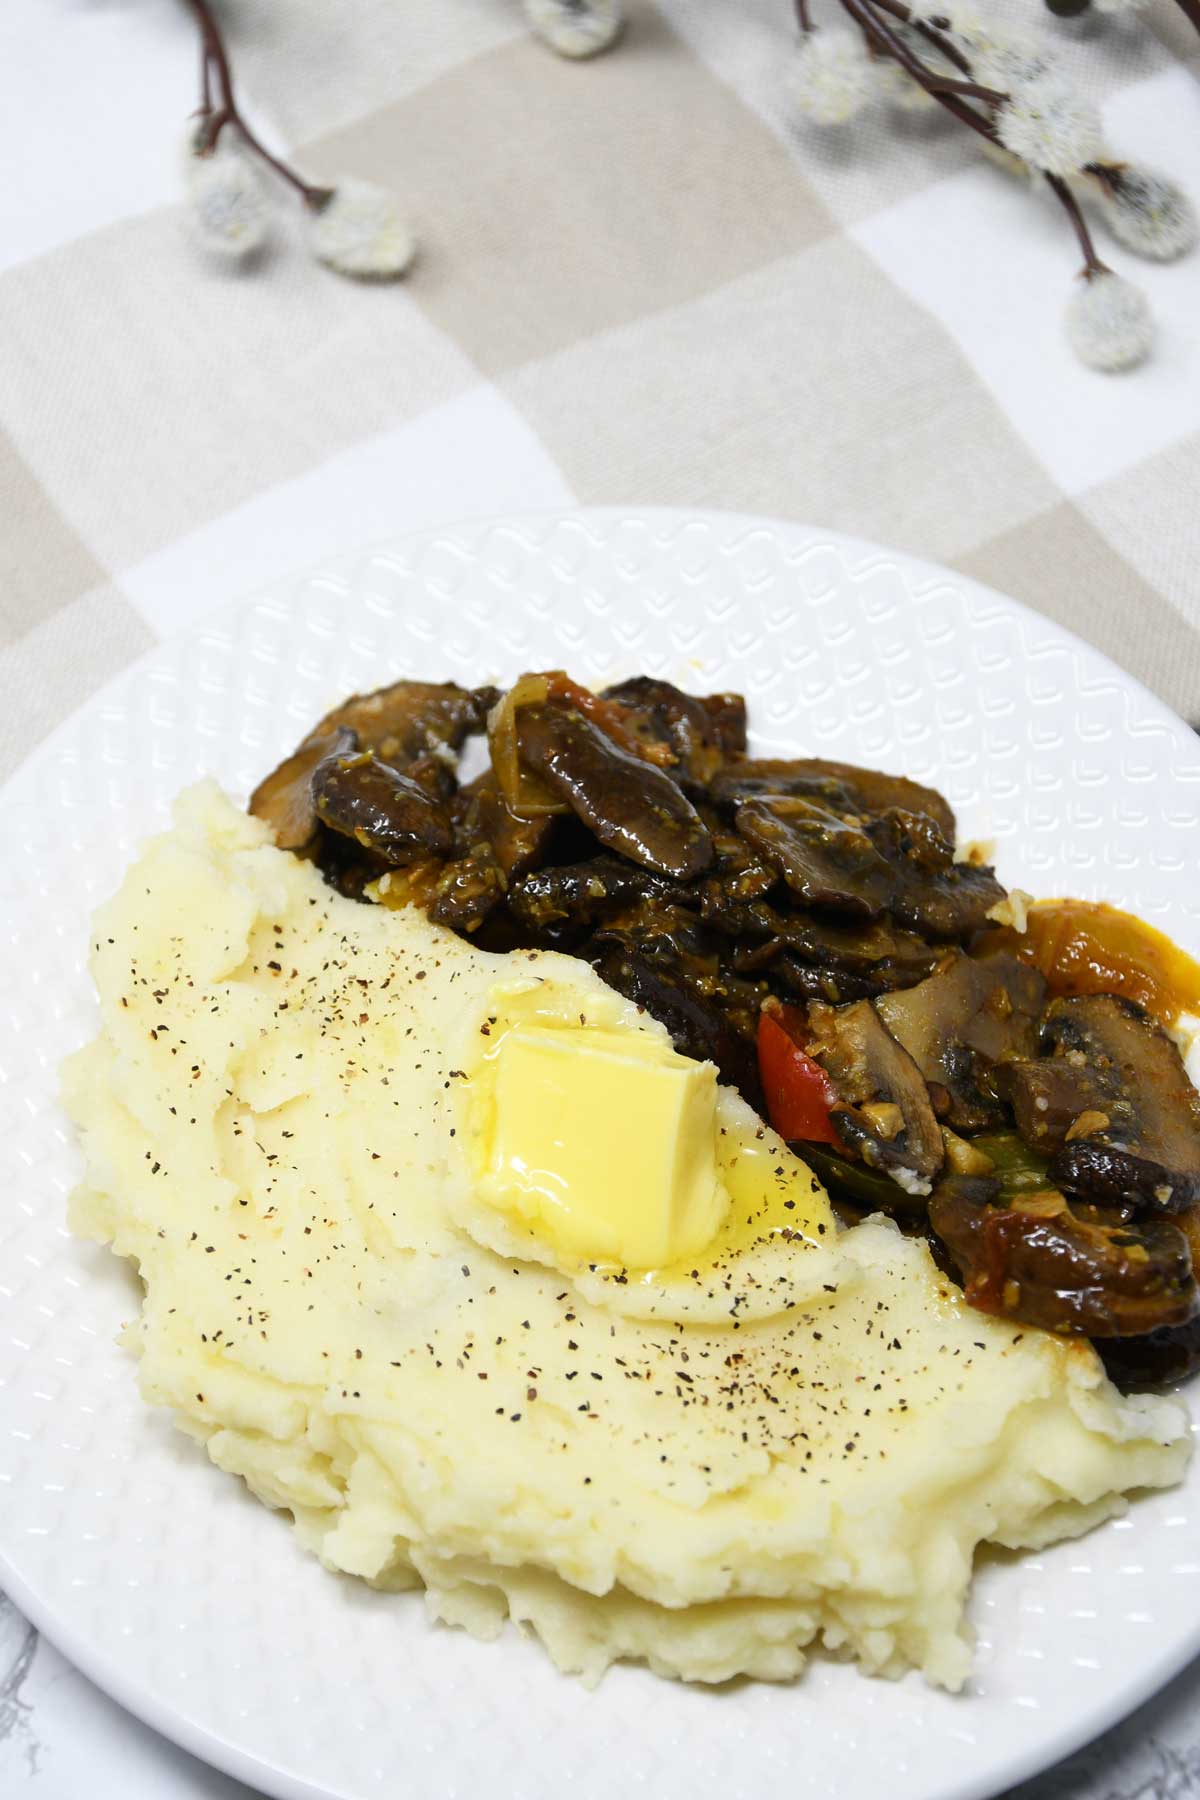 Mashed potato in a plate with butter cube as topping and mushroom sides.